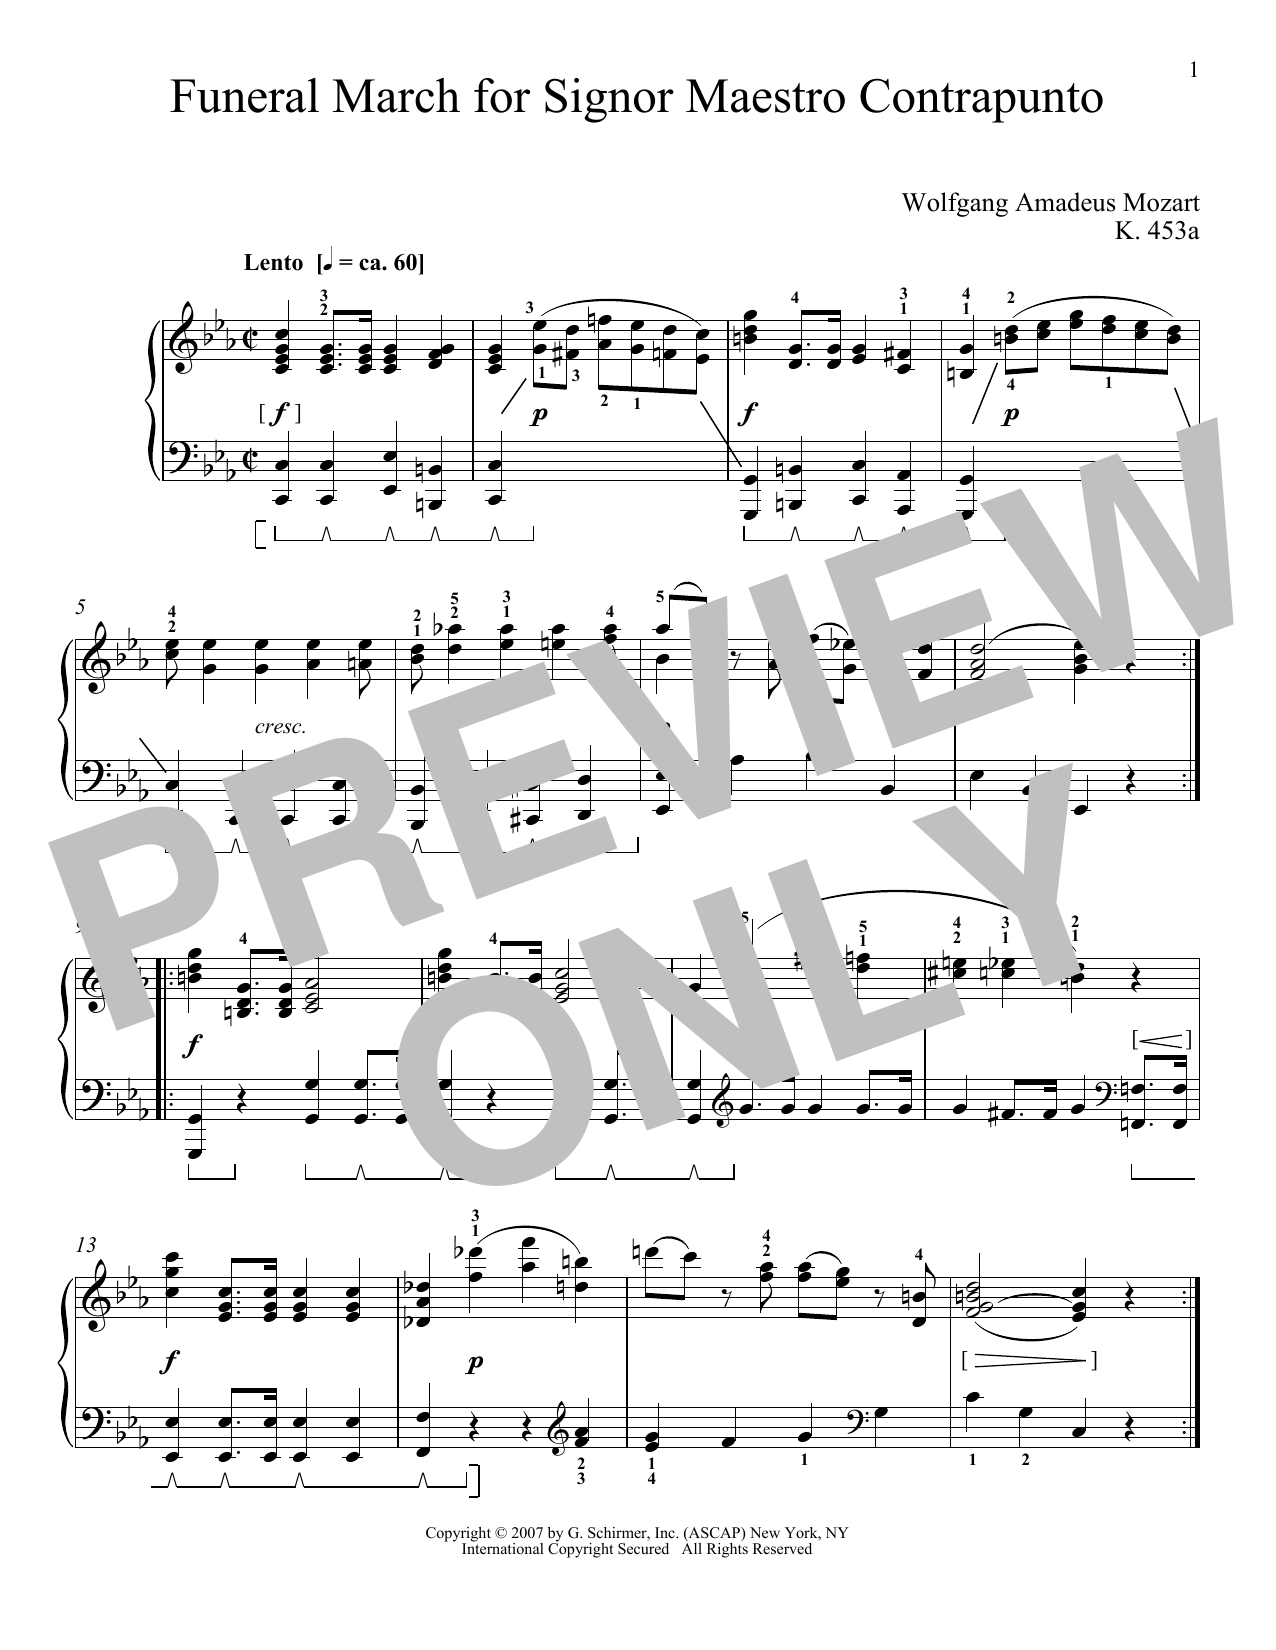 Download Wolfgang Amadeus Mozart Funeral March For Maestro Counterpoint, Sheet Music